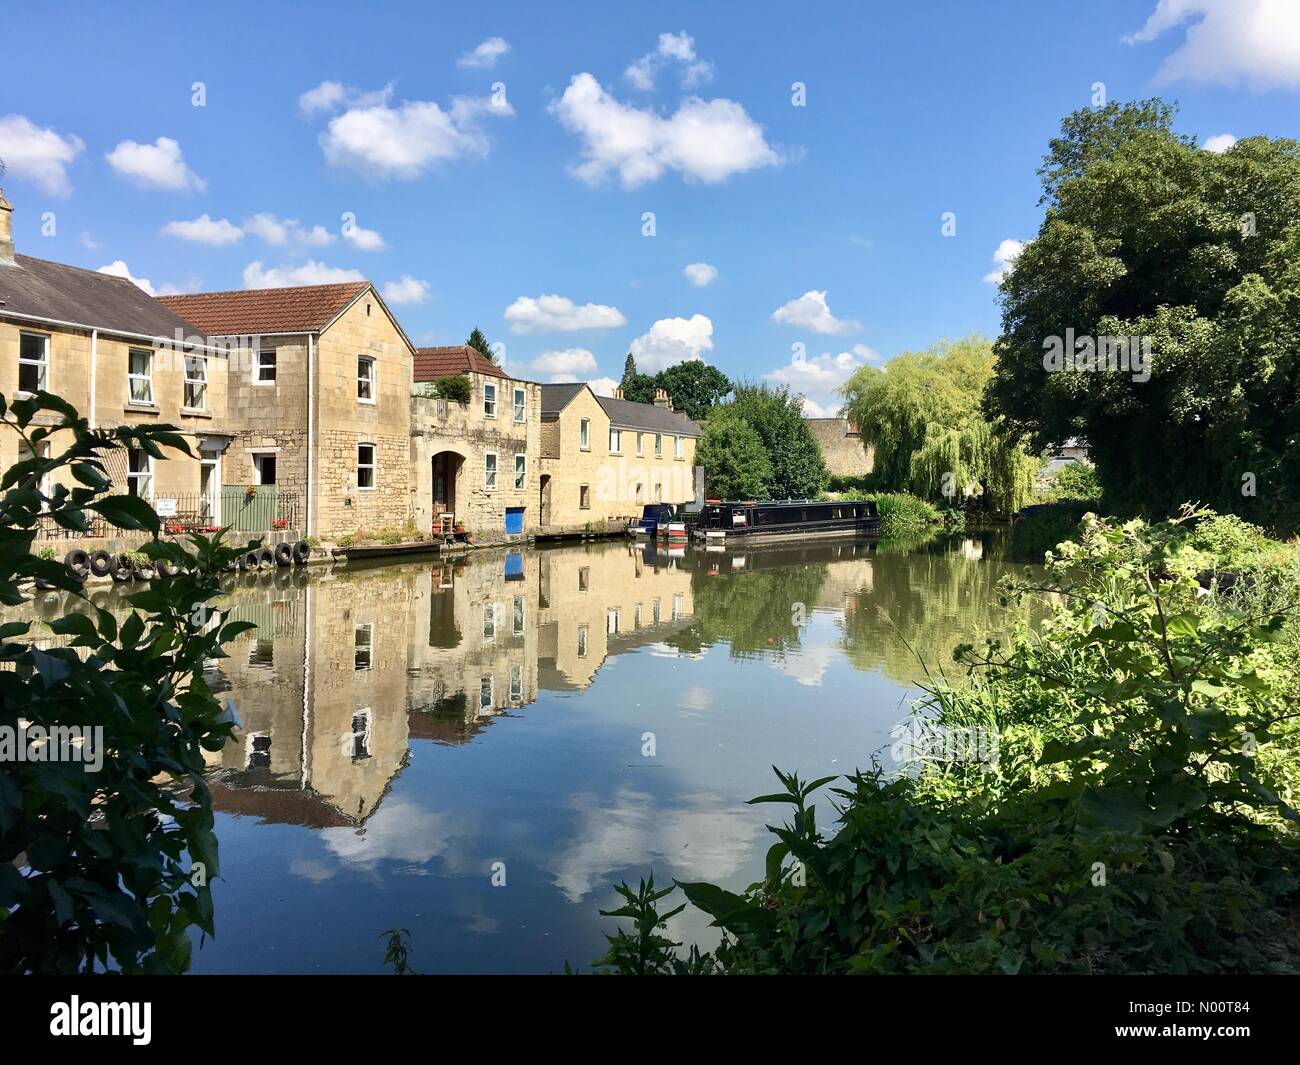 Bath, England 11 July 2018 A sunny and warm 25 degrees today along the Kennet and Avon Canal at Bath. Credit: Lisa Werner/StockimoNews/Alamy Live News Stock Photo